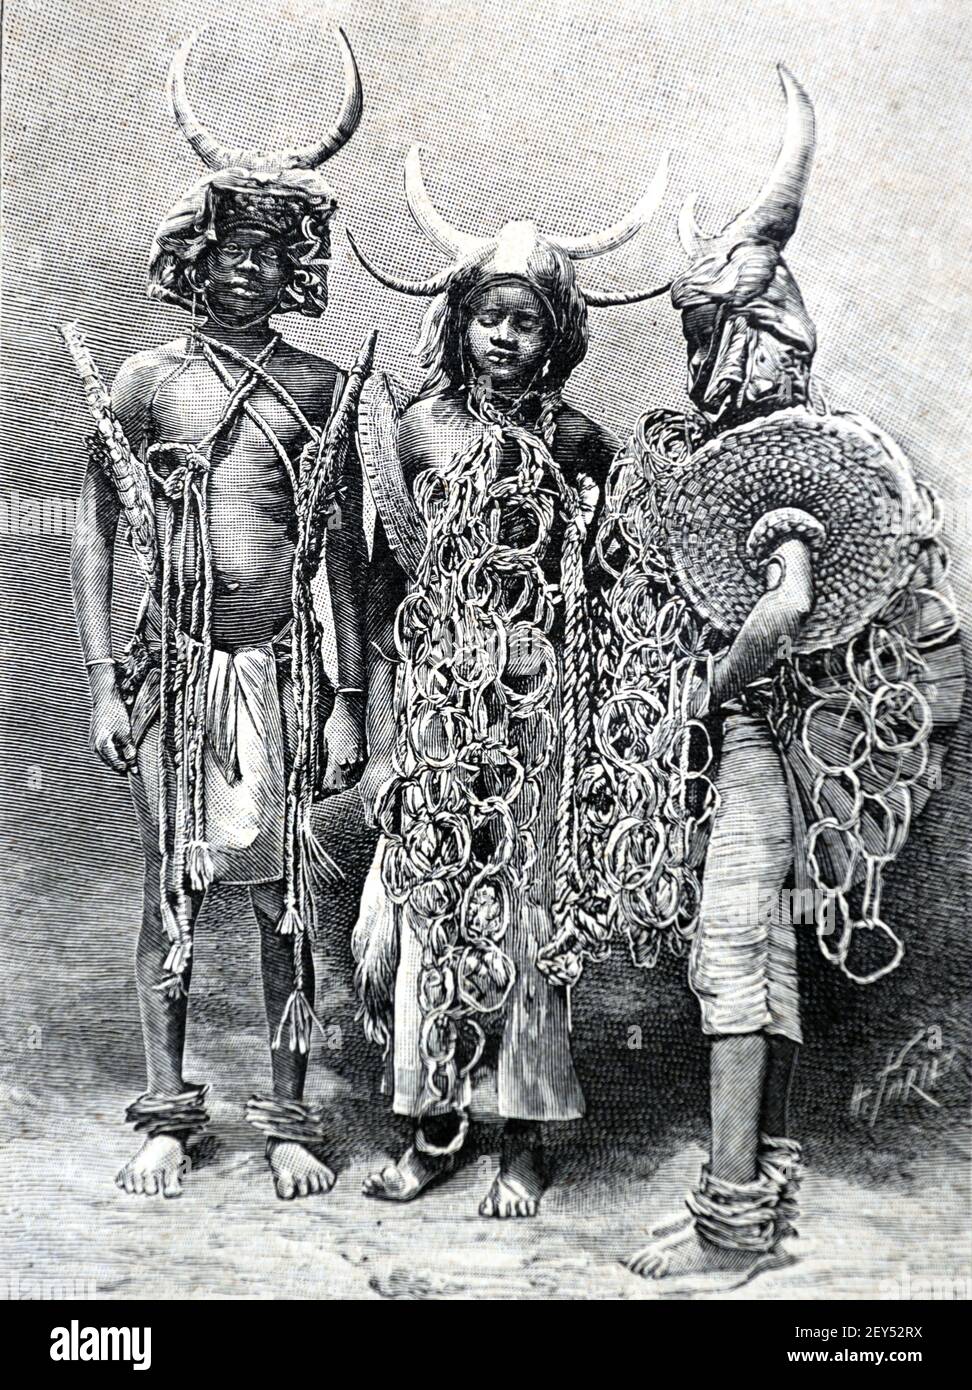 Papels or Papel People, aka as Moium, Papei, Oium, Pepel or Pelels, wearing Tribal Dress or Traditional Costumes. The Papel Jive in Parts of Senegal, Guinea Bissau and Guinea, West Africa 1896 Vintage Illustration or Old Engraving Stock Photo